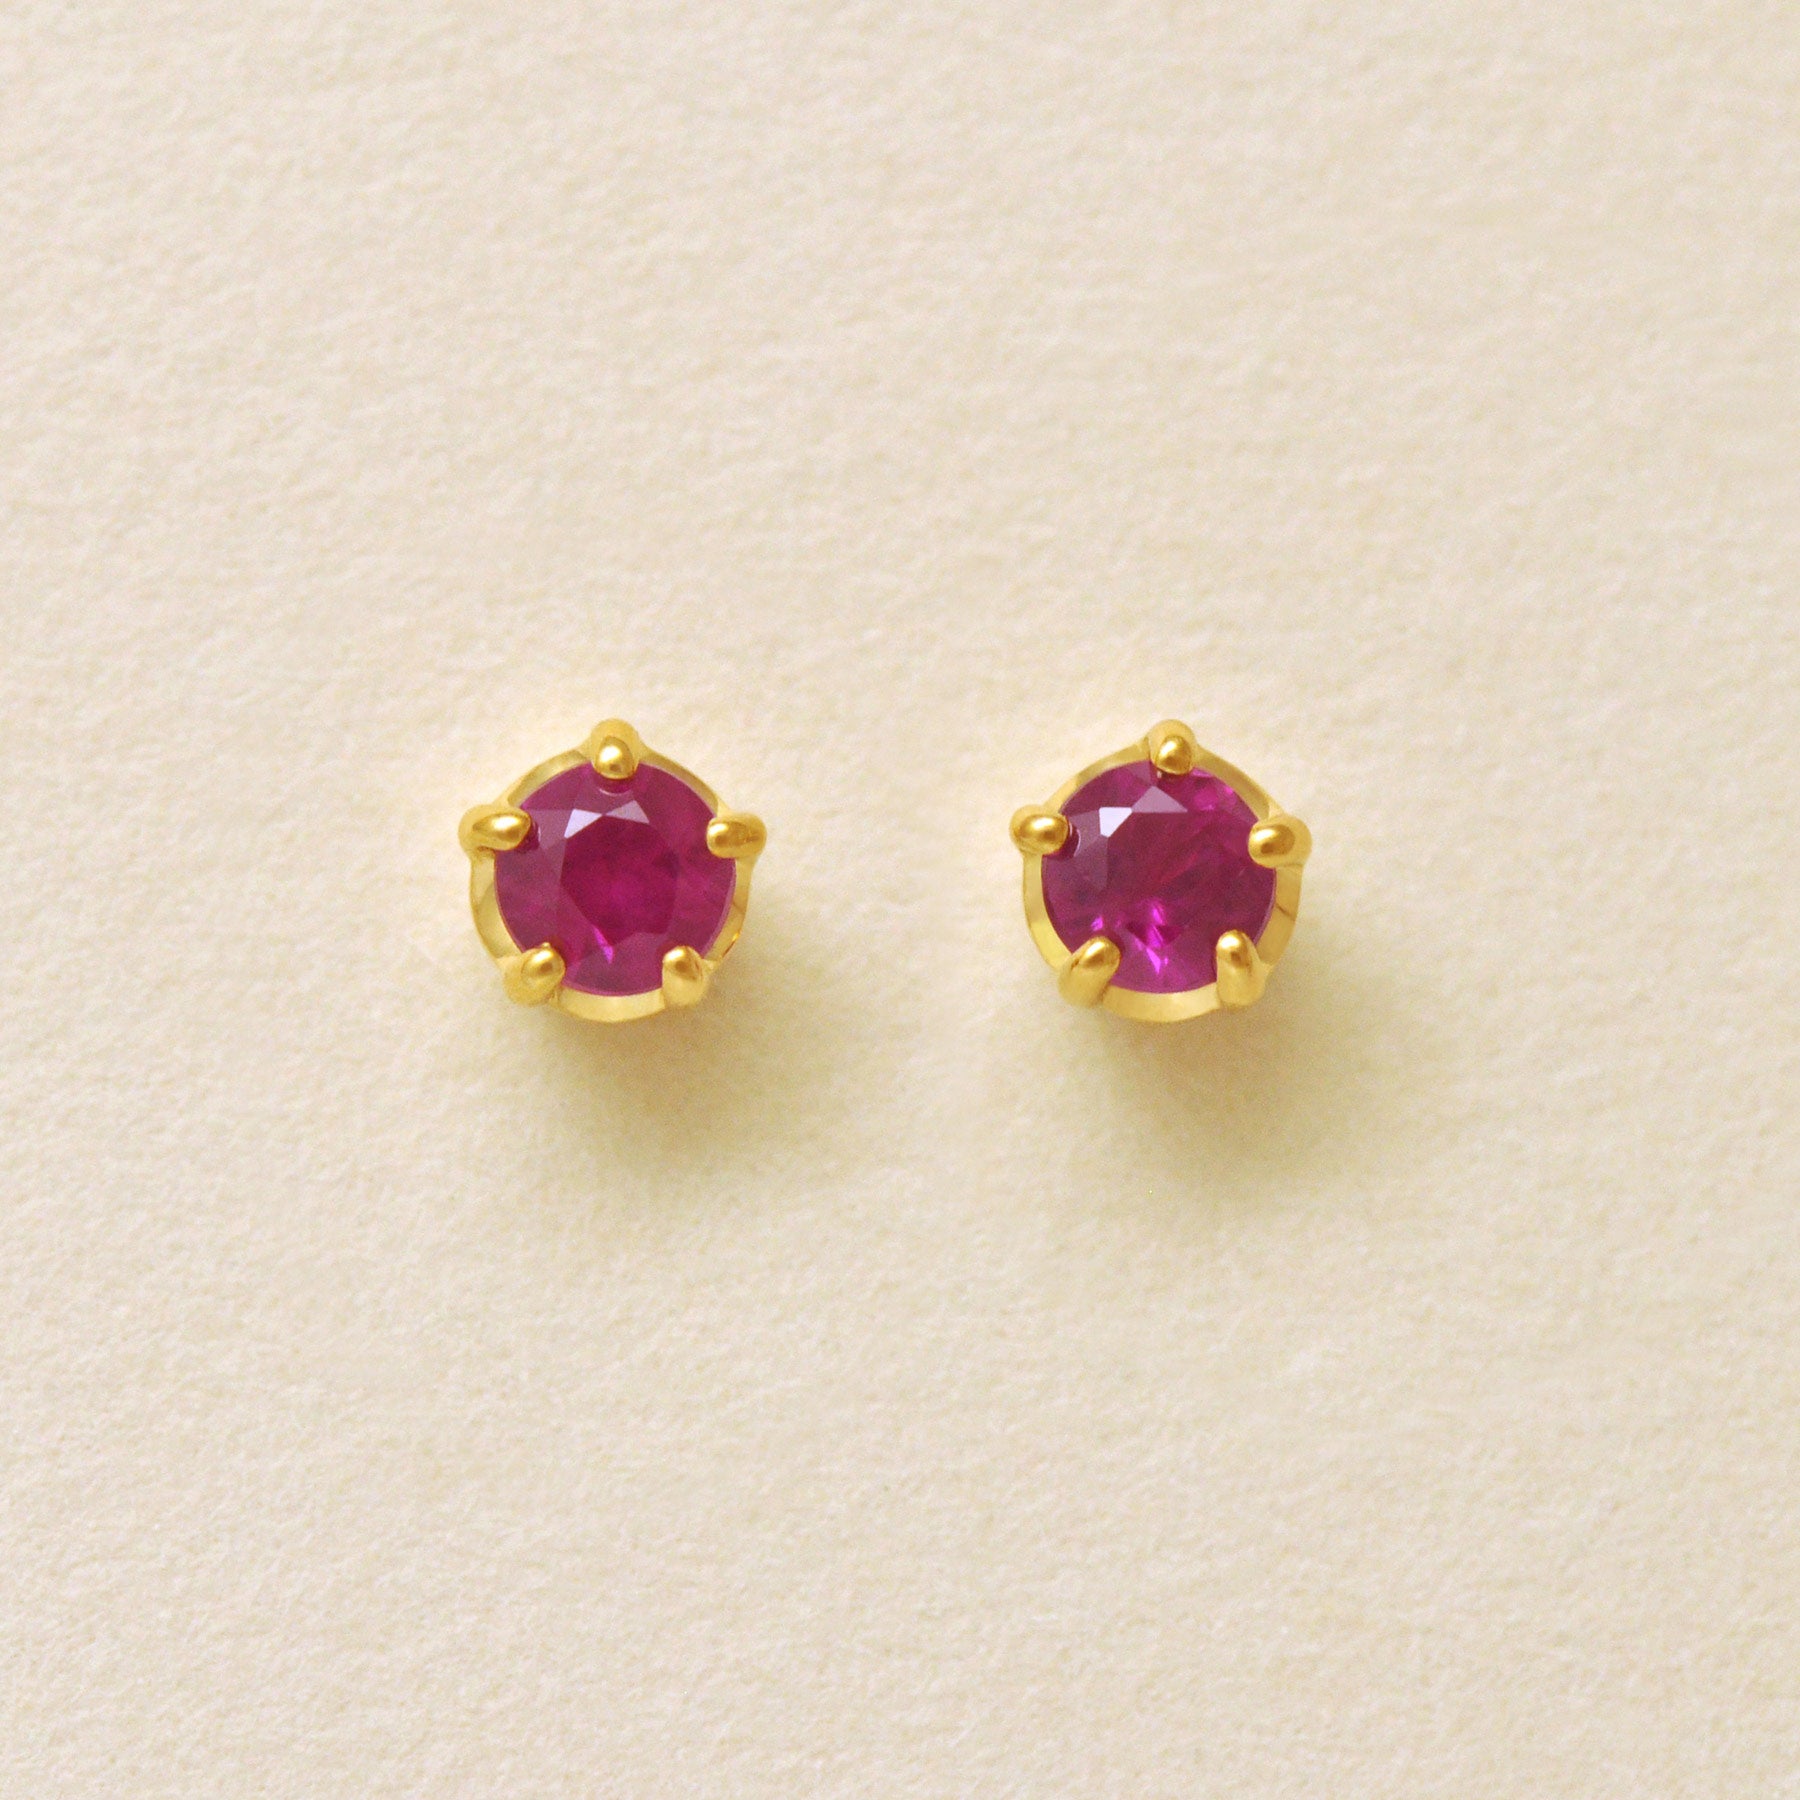 [Second Earrings] 18K Yellow Gold Ruby Earrings (Φ3mm) - Product Image